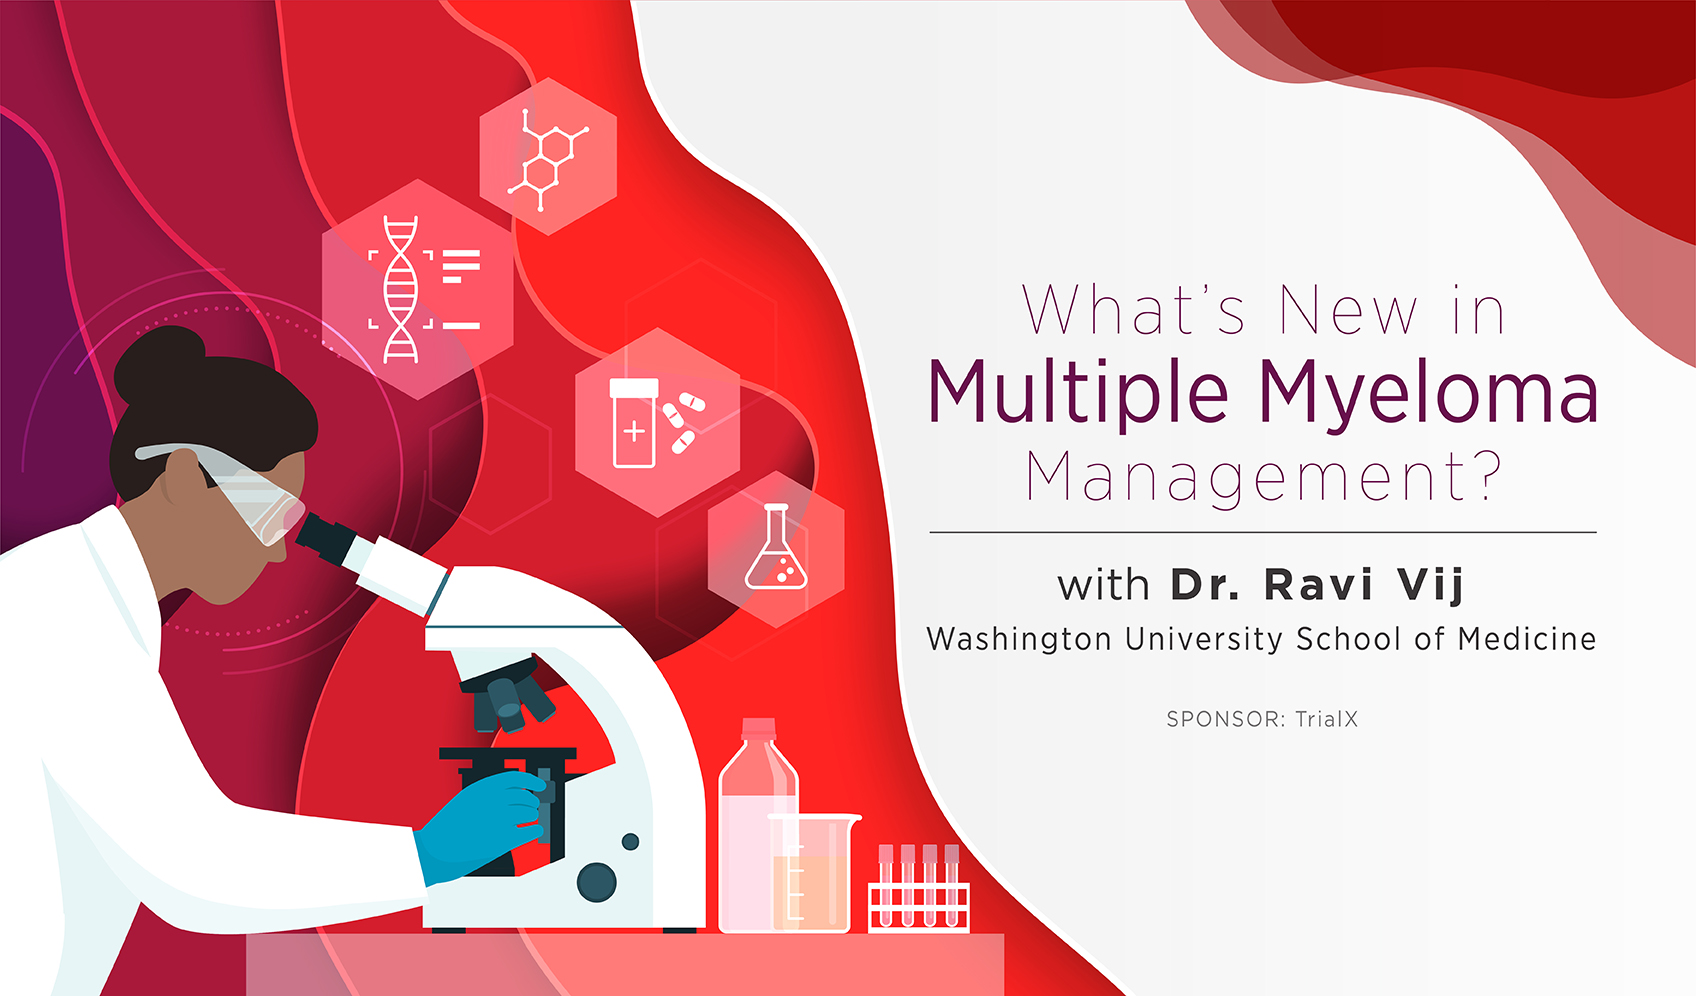 What’s New in Multiple Myeloma Management?